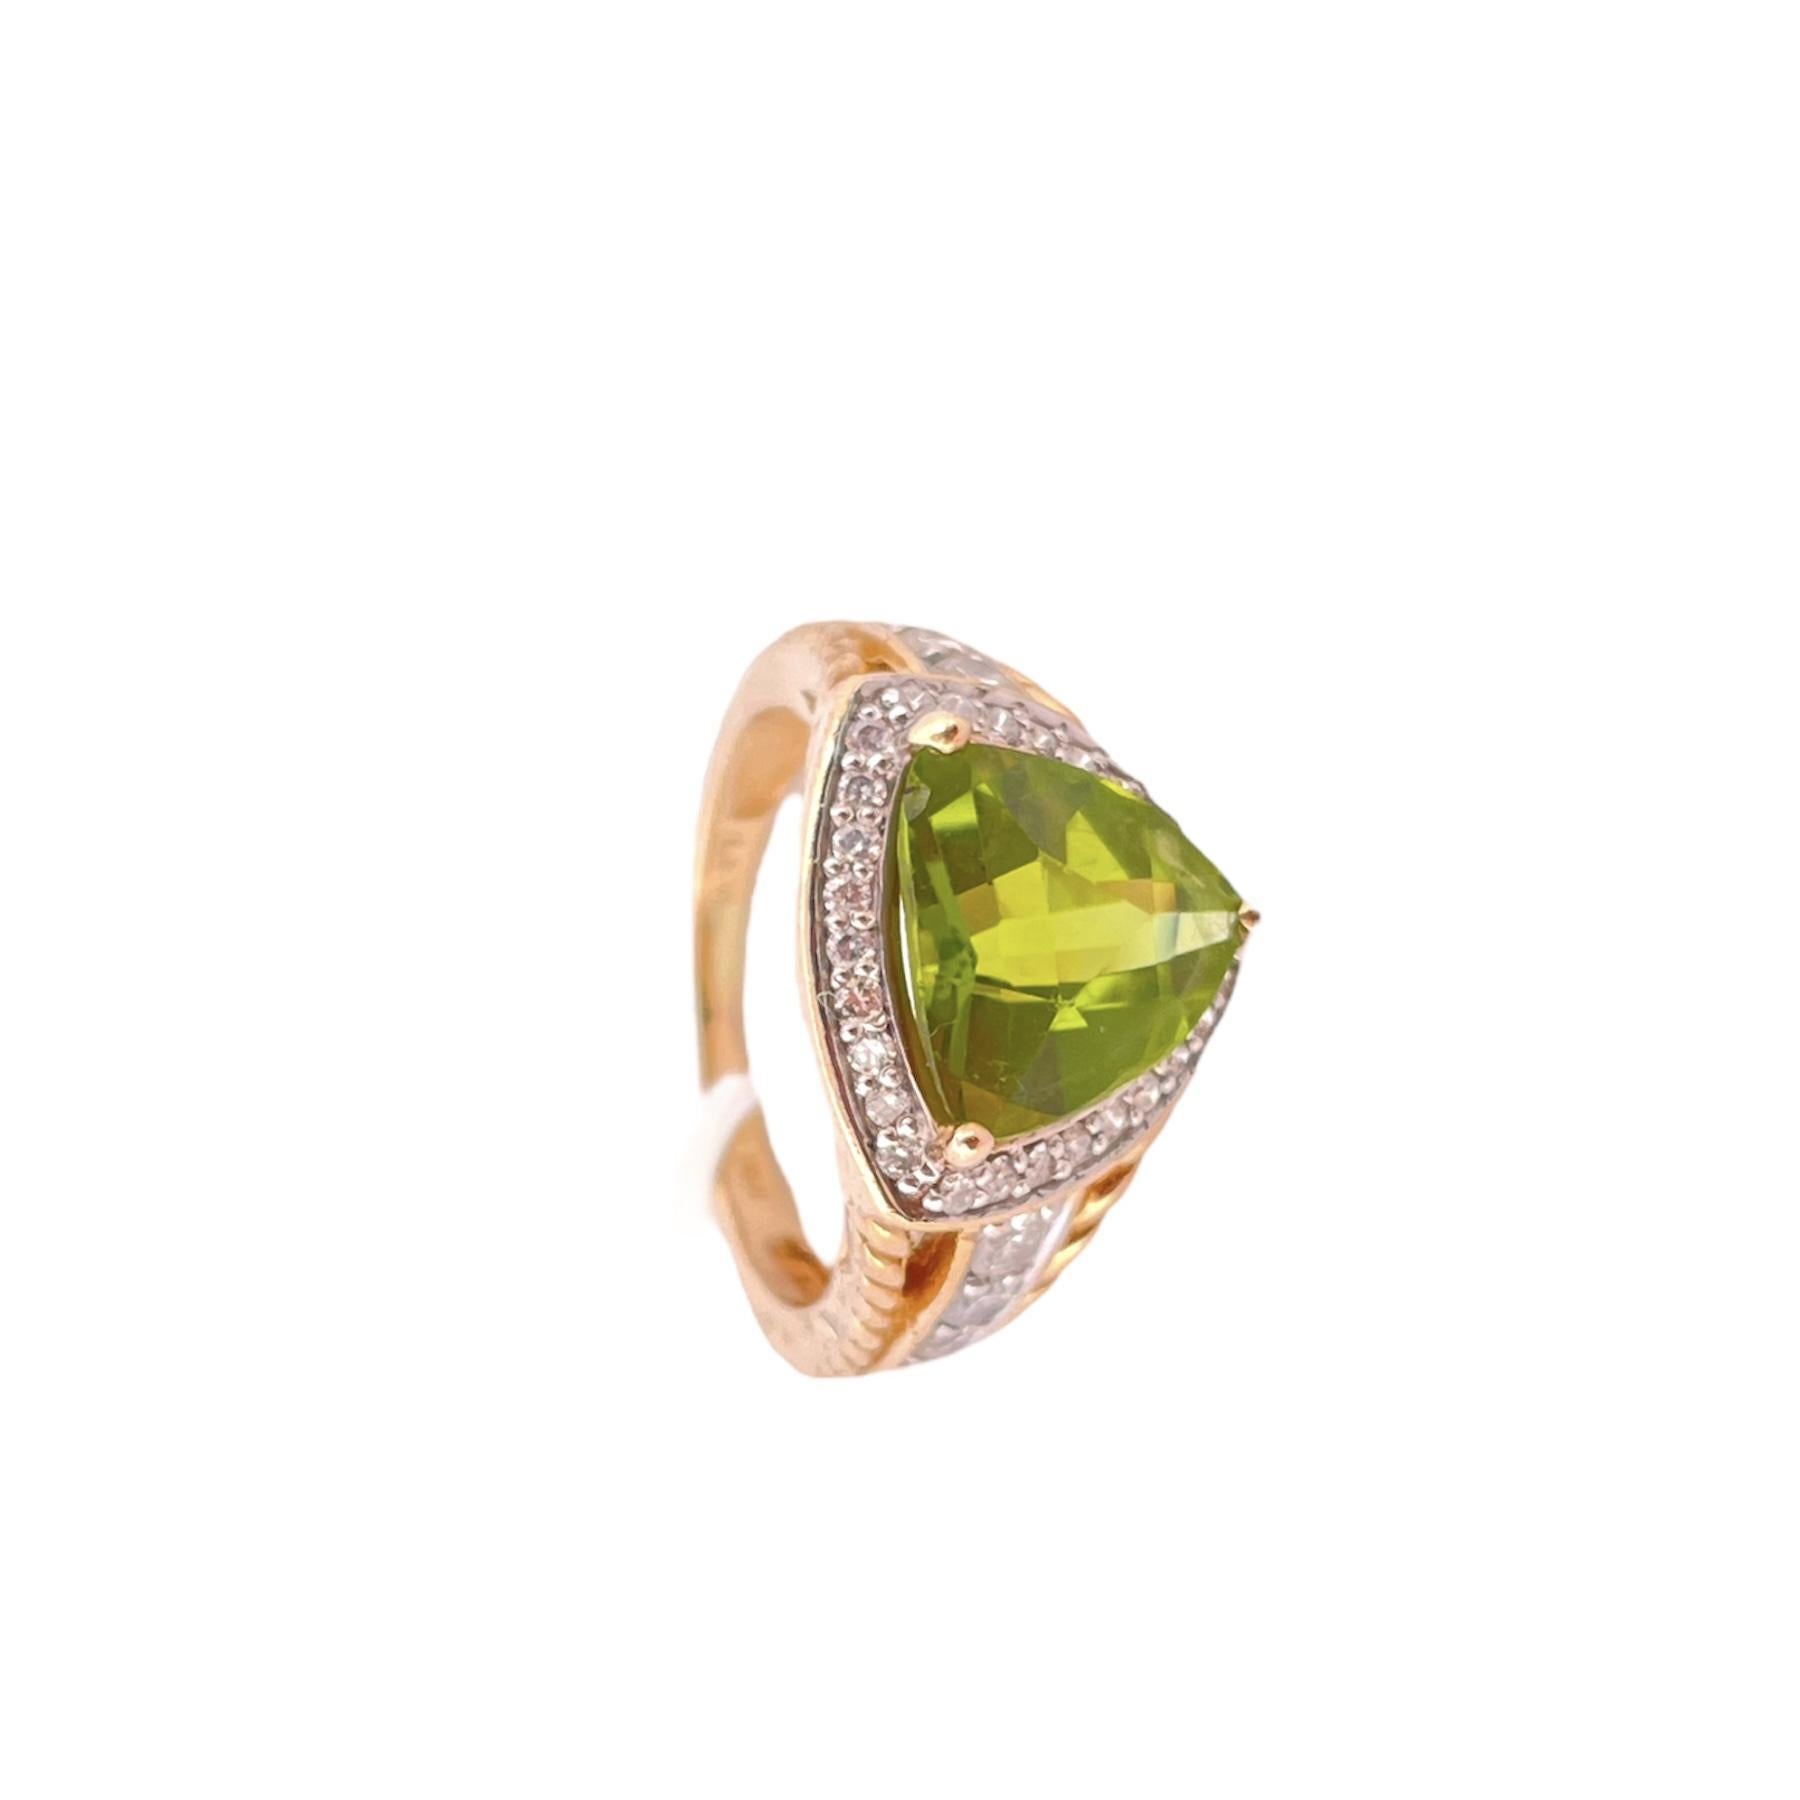 Step into a world of glamour and elegance with this exquisite LeVian Trillion Peridot Ring, adorned with 0.60 total carat weight (TCW) of diamond accents. 
Crafted in opulent 14K yellow gold and weighing 5.58 grams, this ring is a true masterpiece